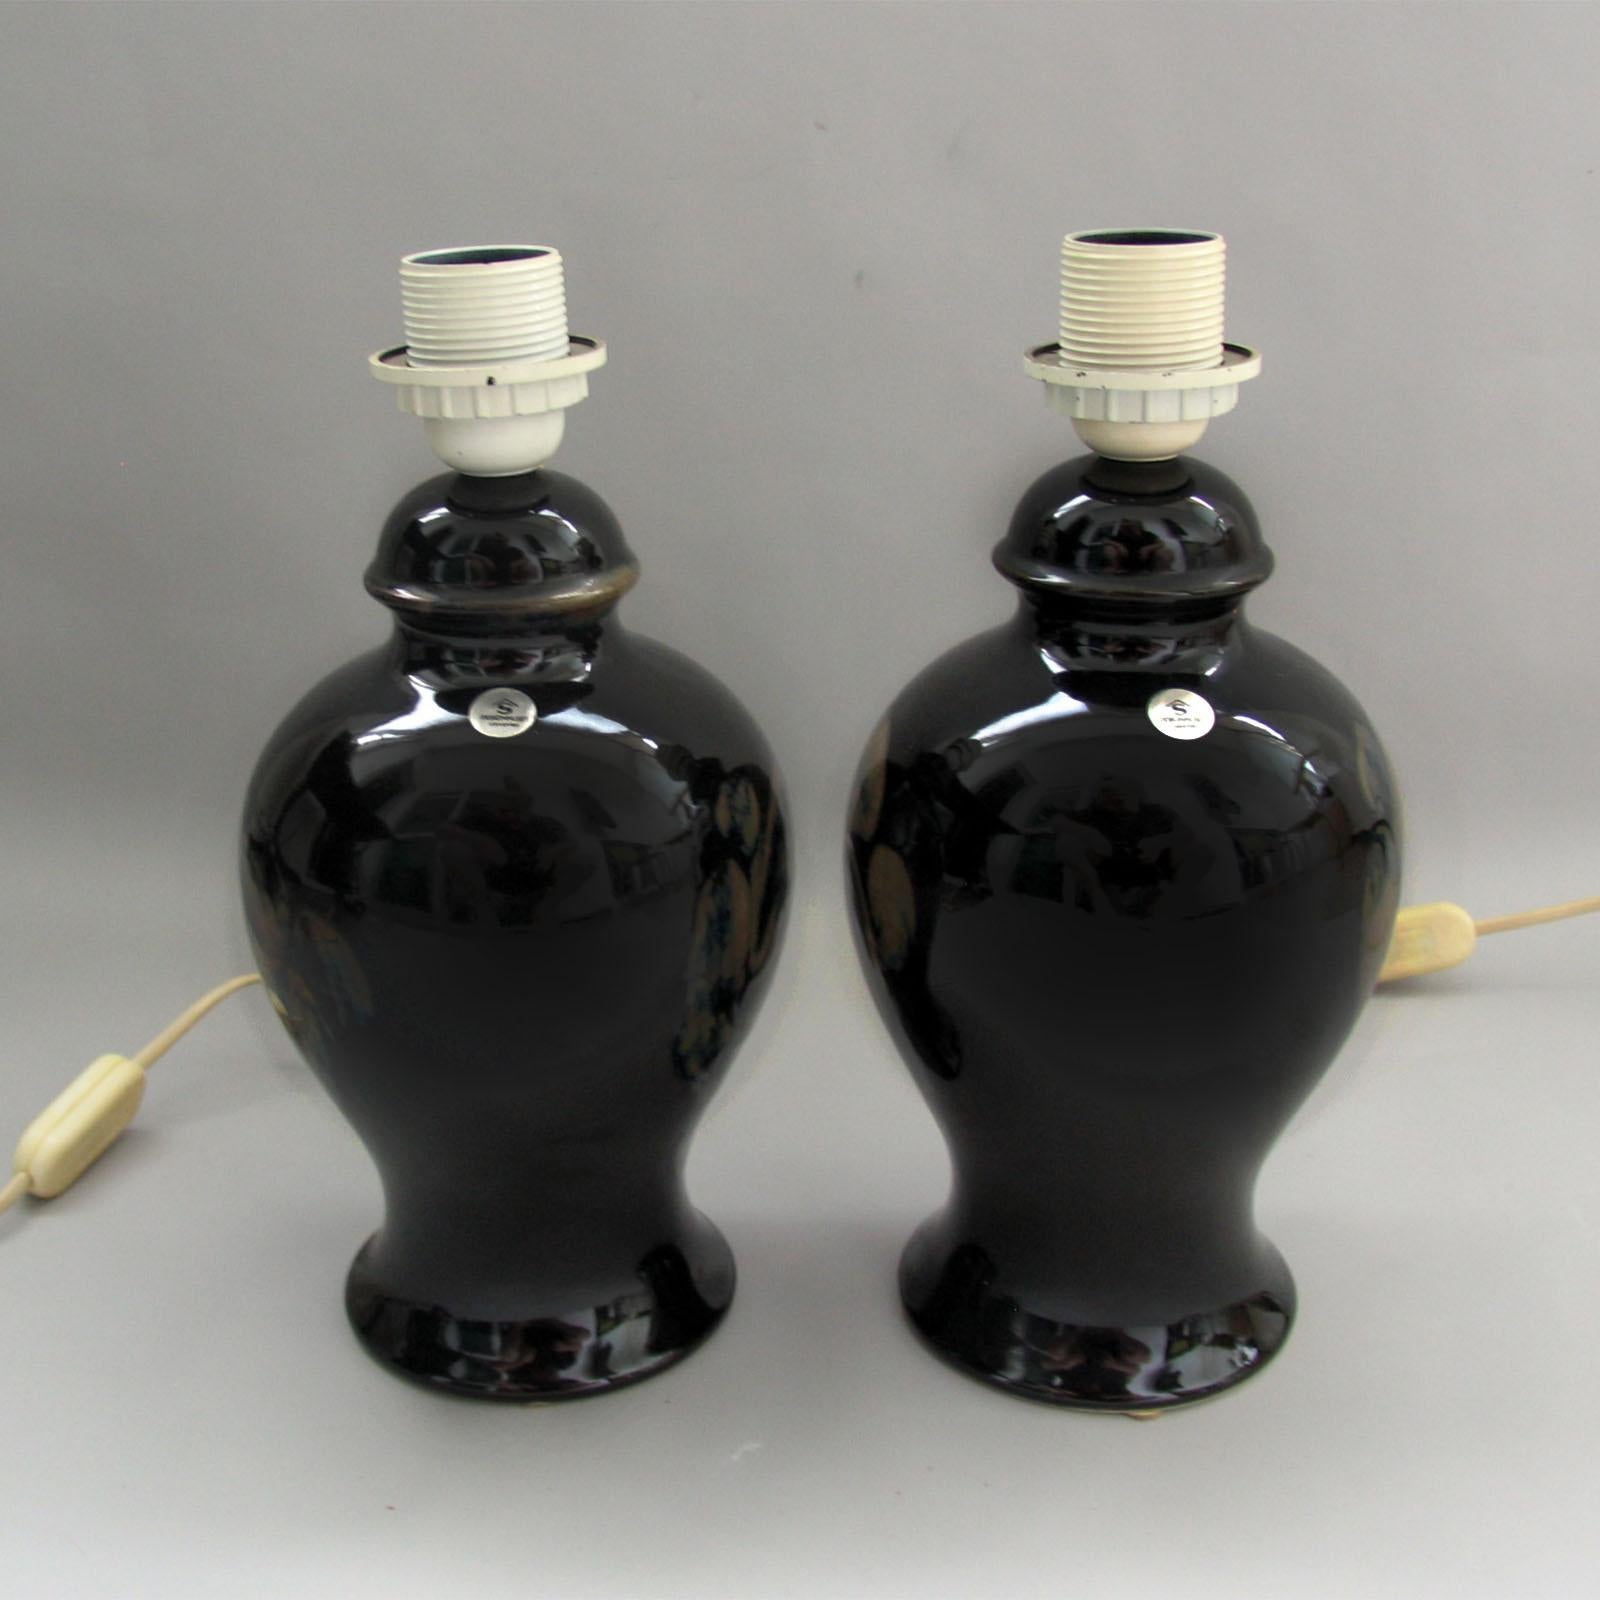 Stoneware Kent Ericsson and Carl-Harry Stalhane Rare Pair of Ceramic Table Lamps For Sale